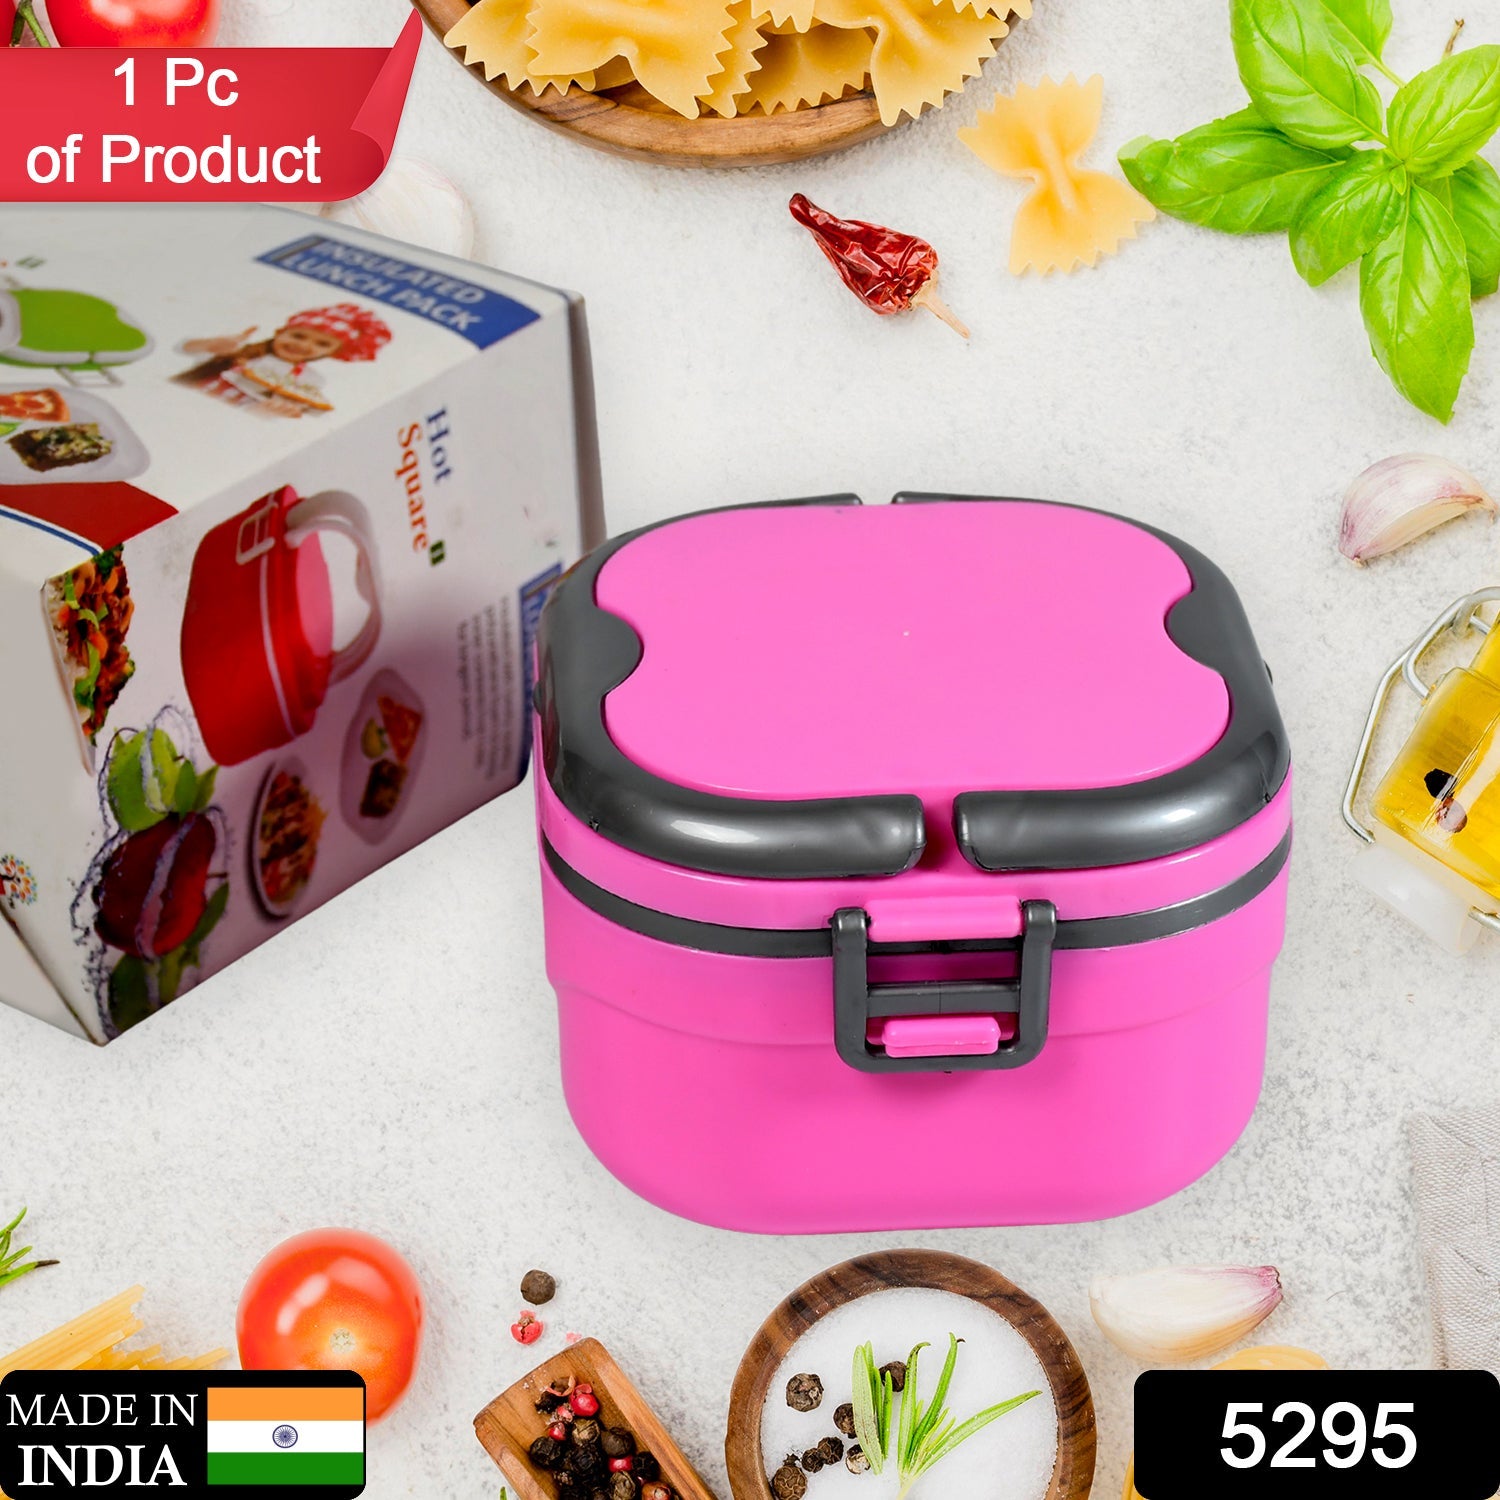 5295 Insulated Lunch Box Square Hot Lunch Box Microwave Safe Food Grade Tiffin Boxes for Office School, Leak Proof Air Tight Box DeoDap